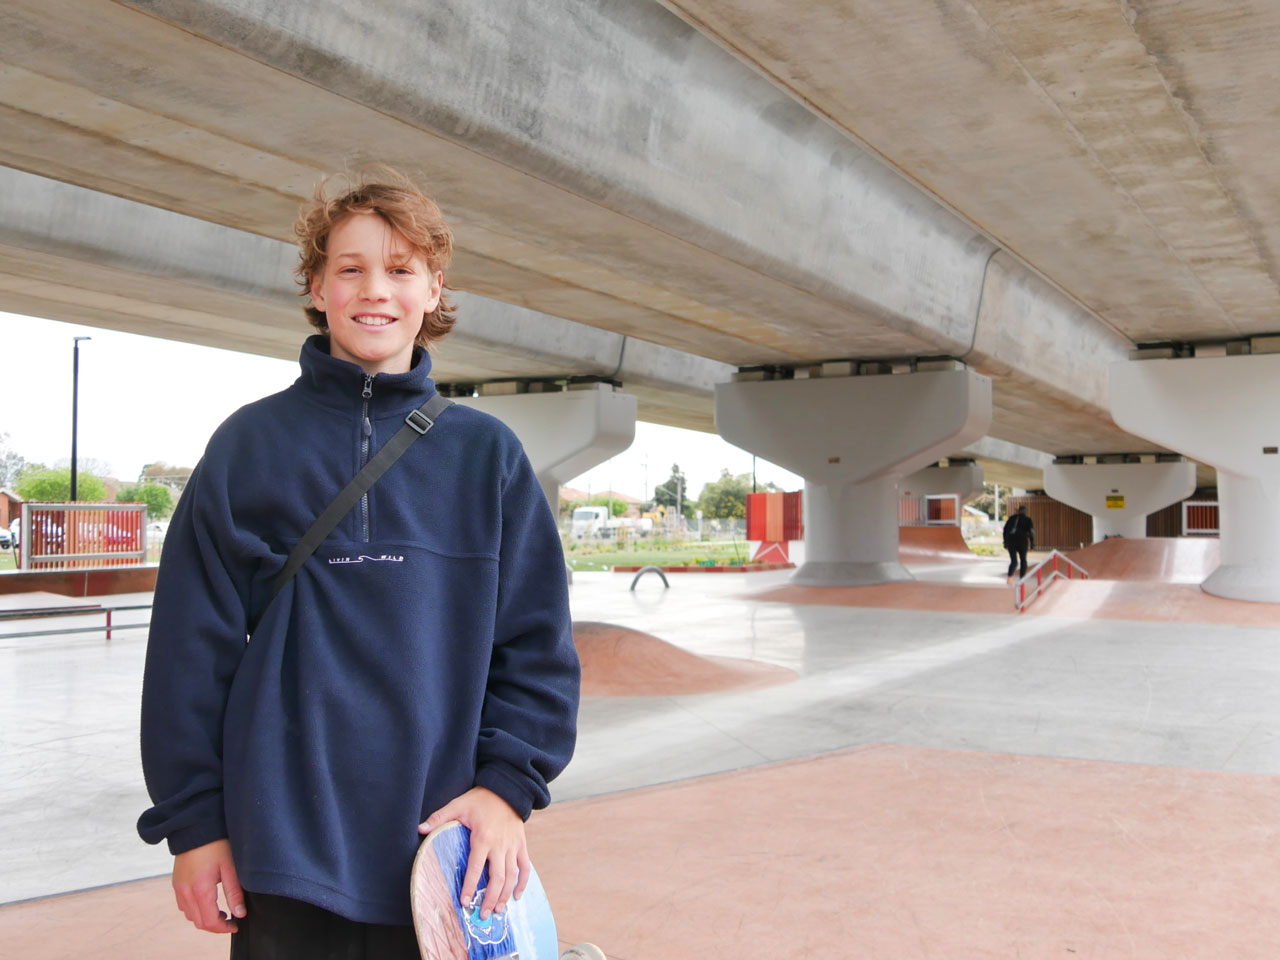 Baker Bitton stands in front of the new Werribee skate park he helped design.